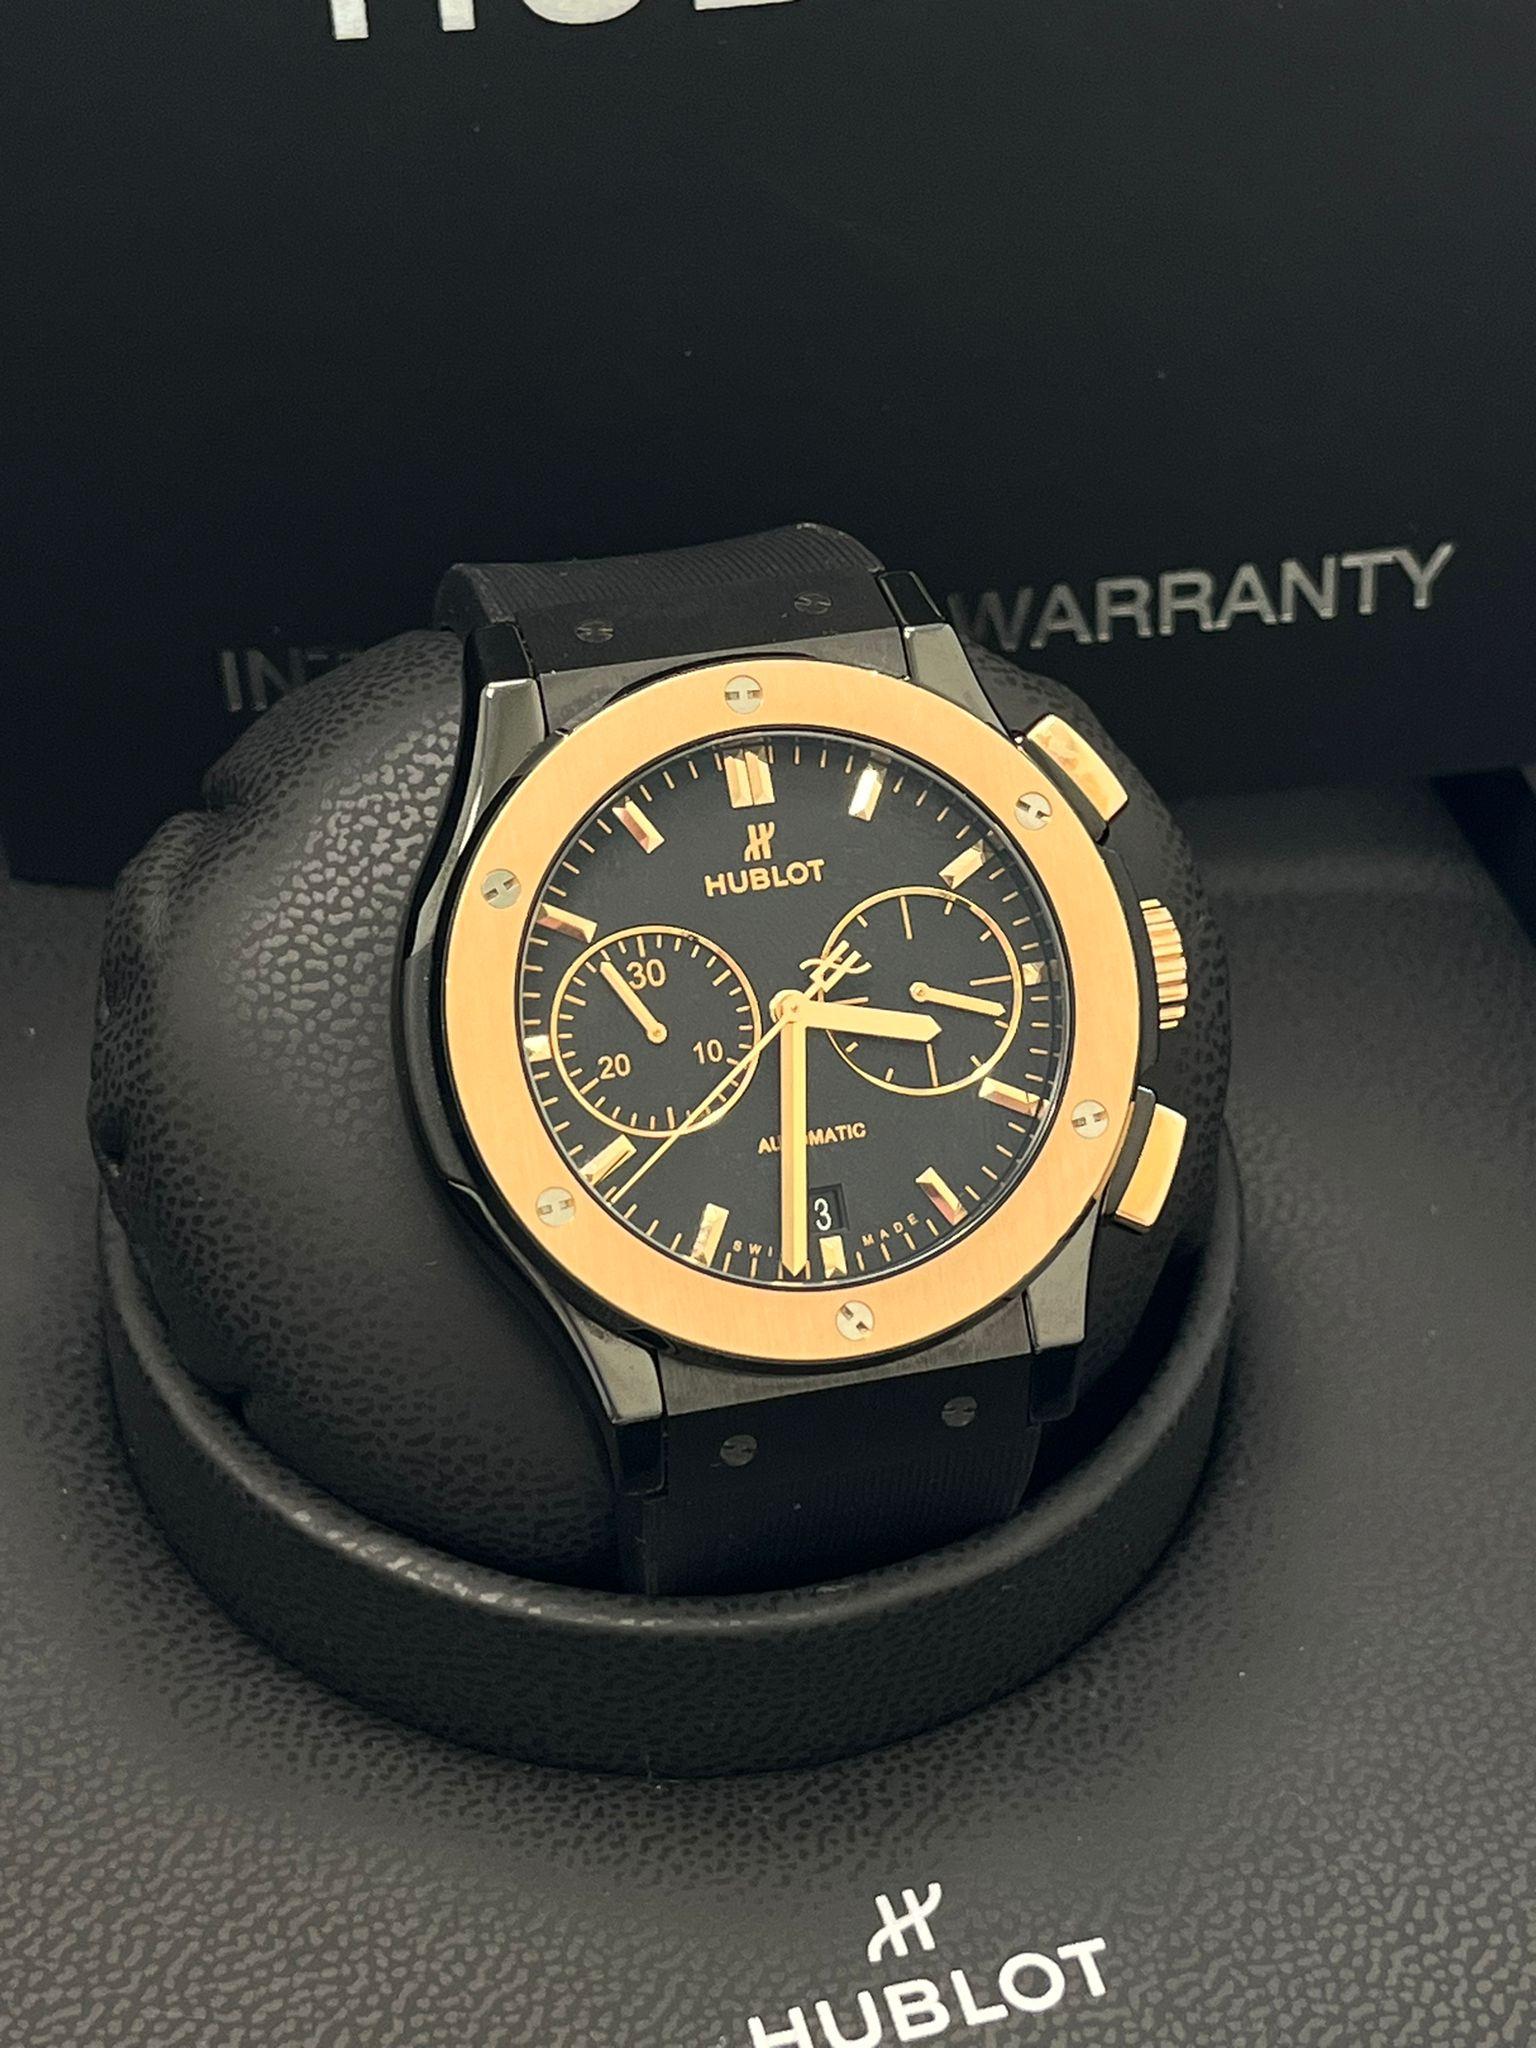 Hublot Classic Fusion Chronograph Ceramic King Gold 45mm Watch 521.CO.1181.RX For Sale 4